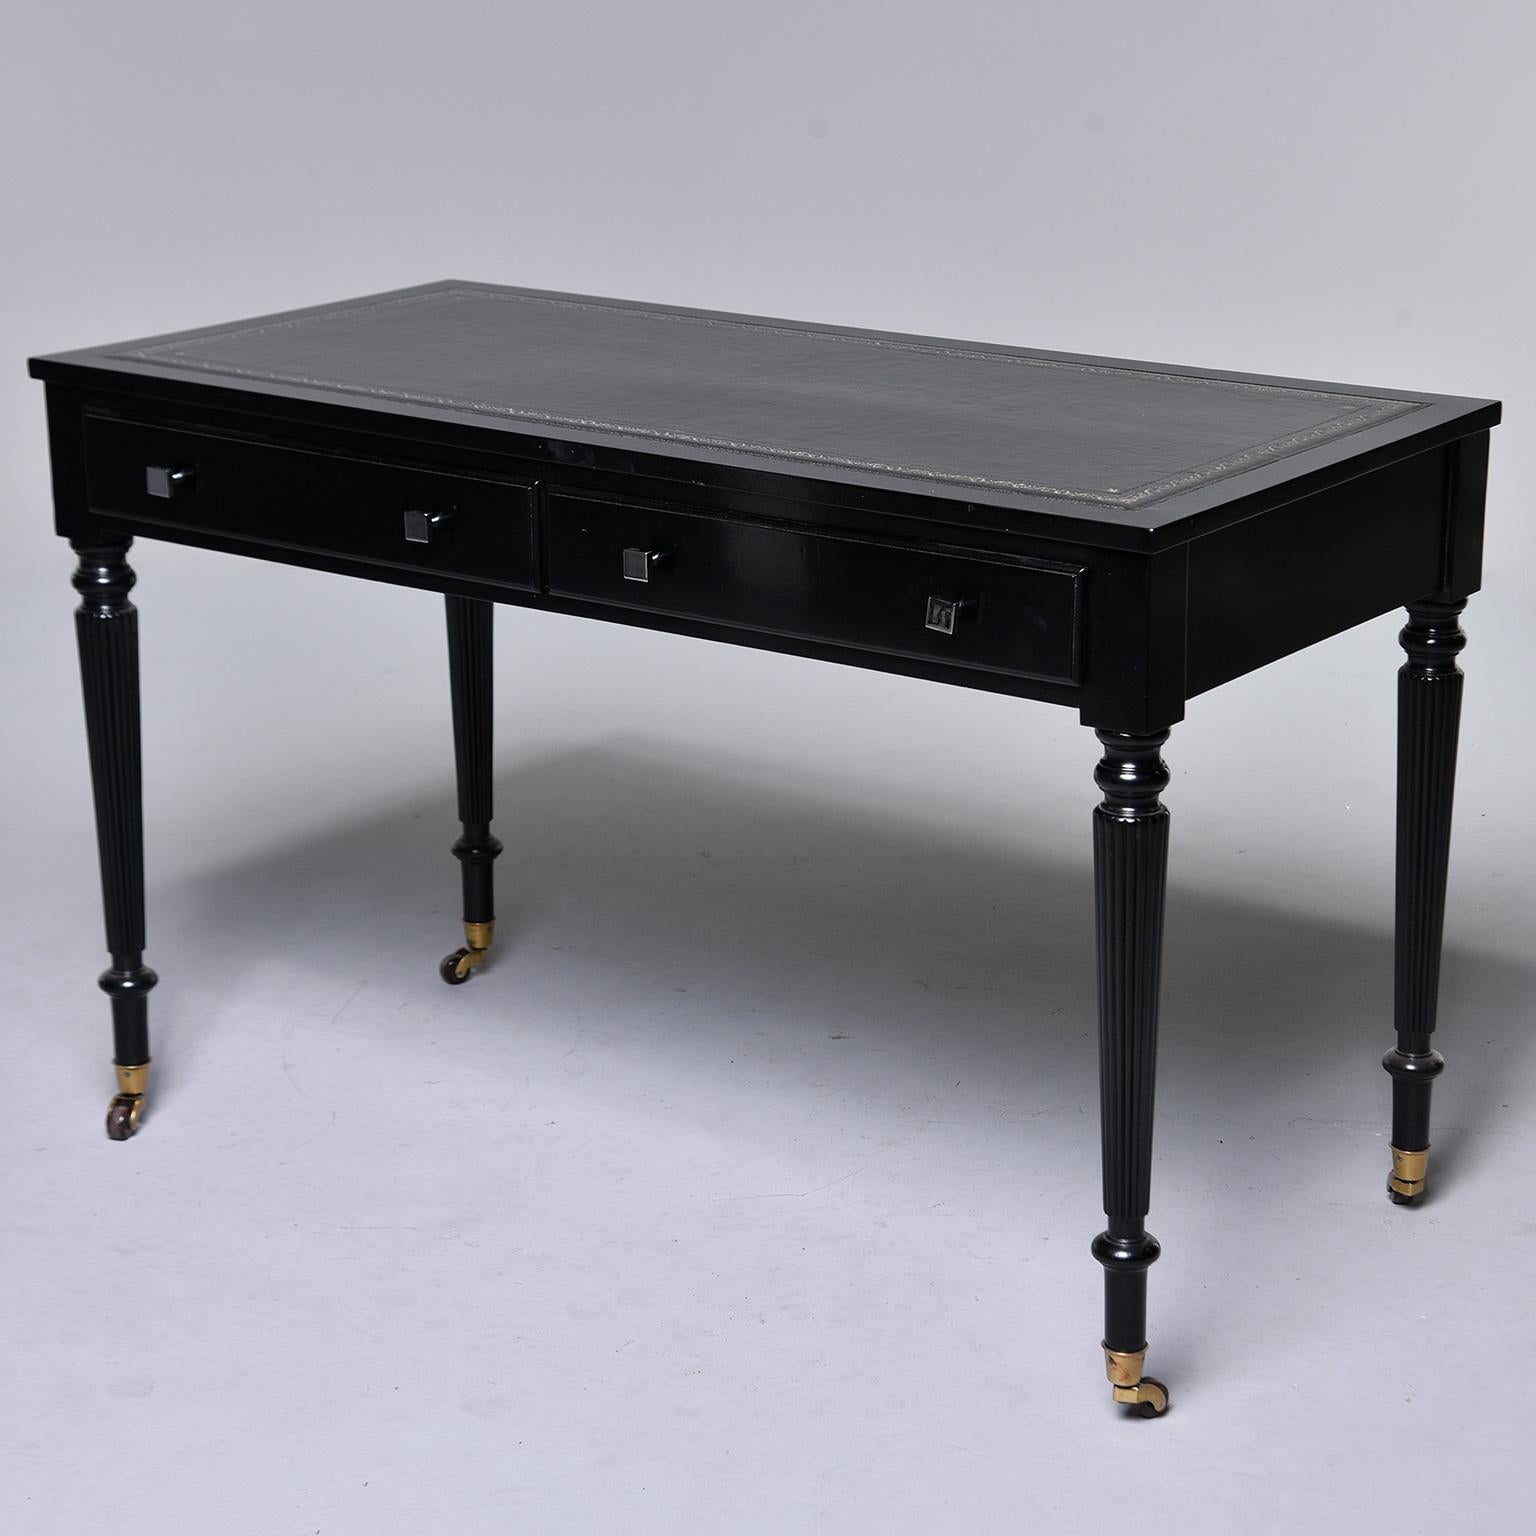 English mahogany desk has a new, professionally applied ebonized finish, new leather top with tooled and silvered border, two functional drawers with new polished nickel hardware, turned and reeded legs with original brass casters, circa 1920s.